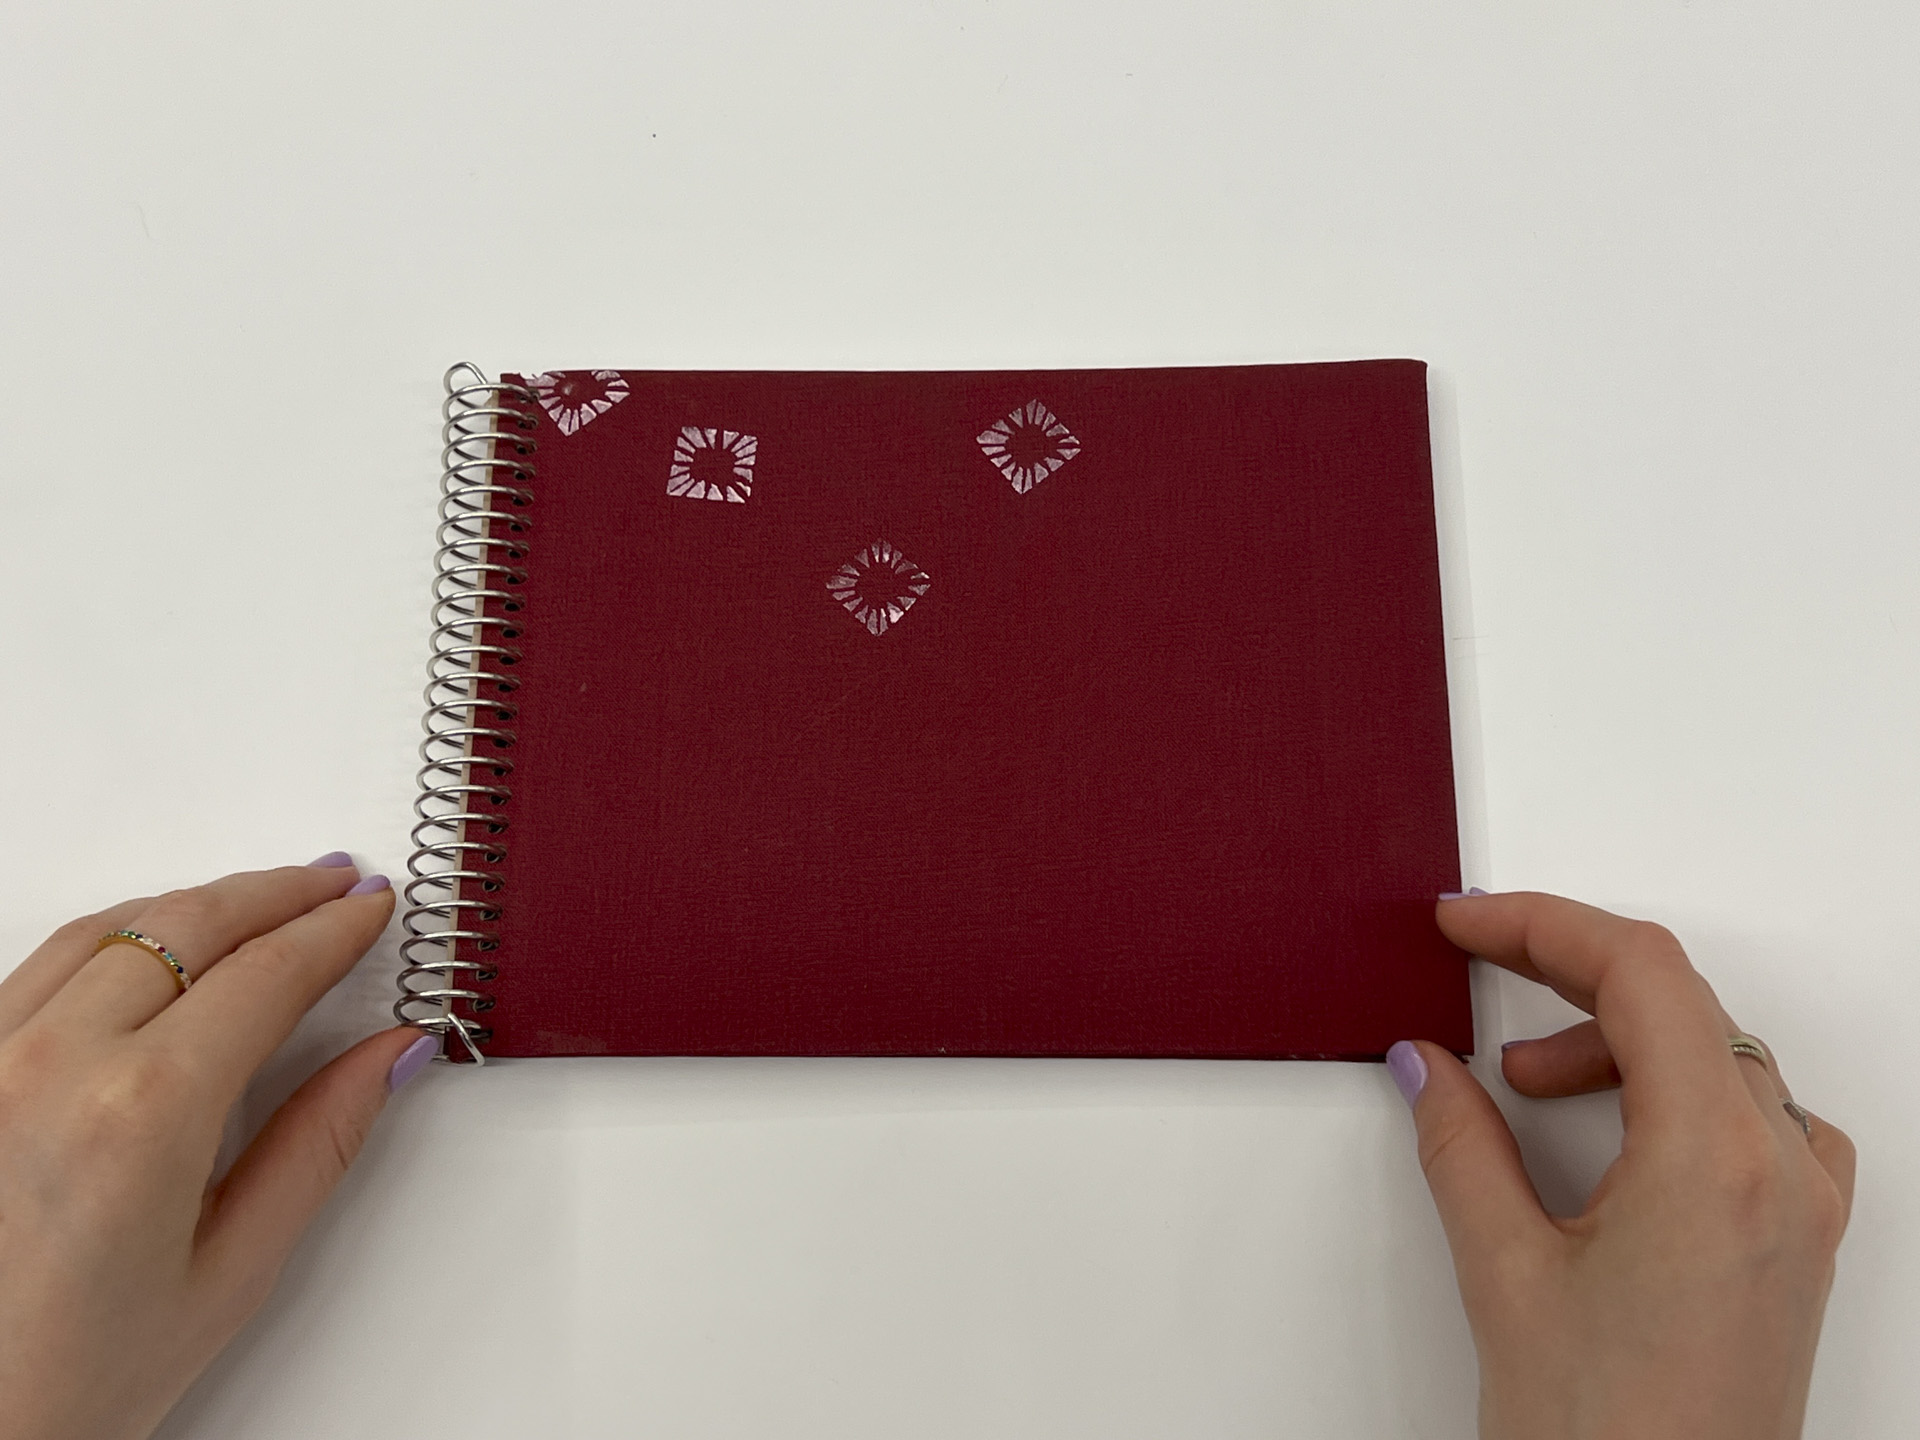 photo of red book cover with ornamental pattern